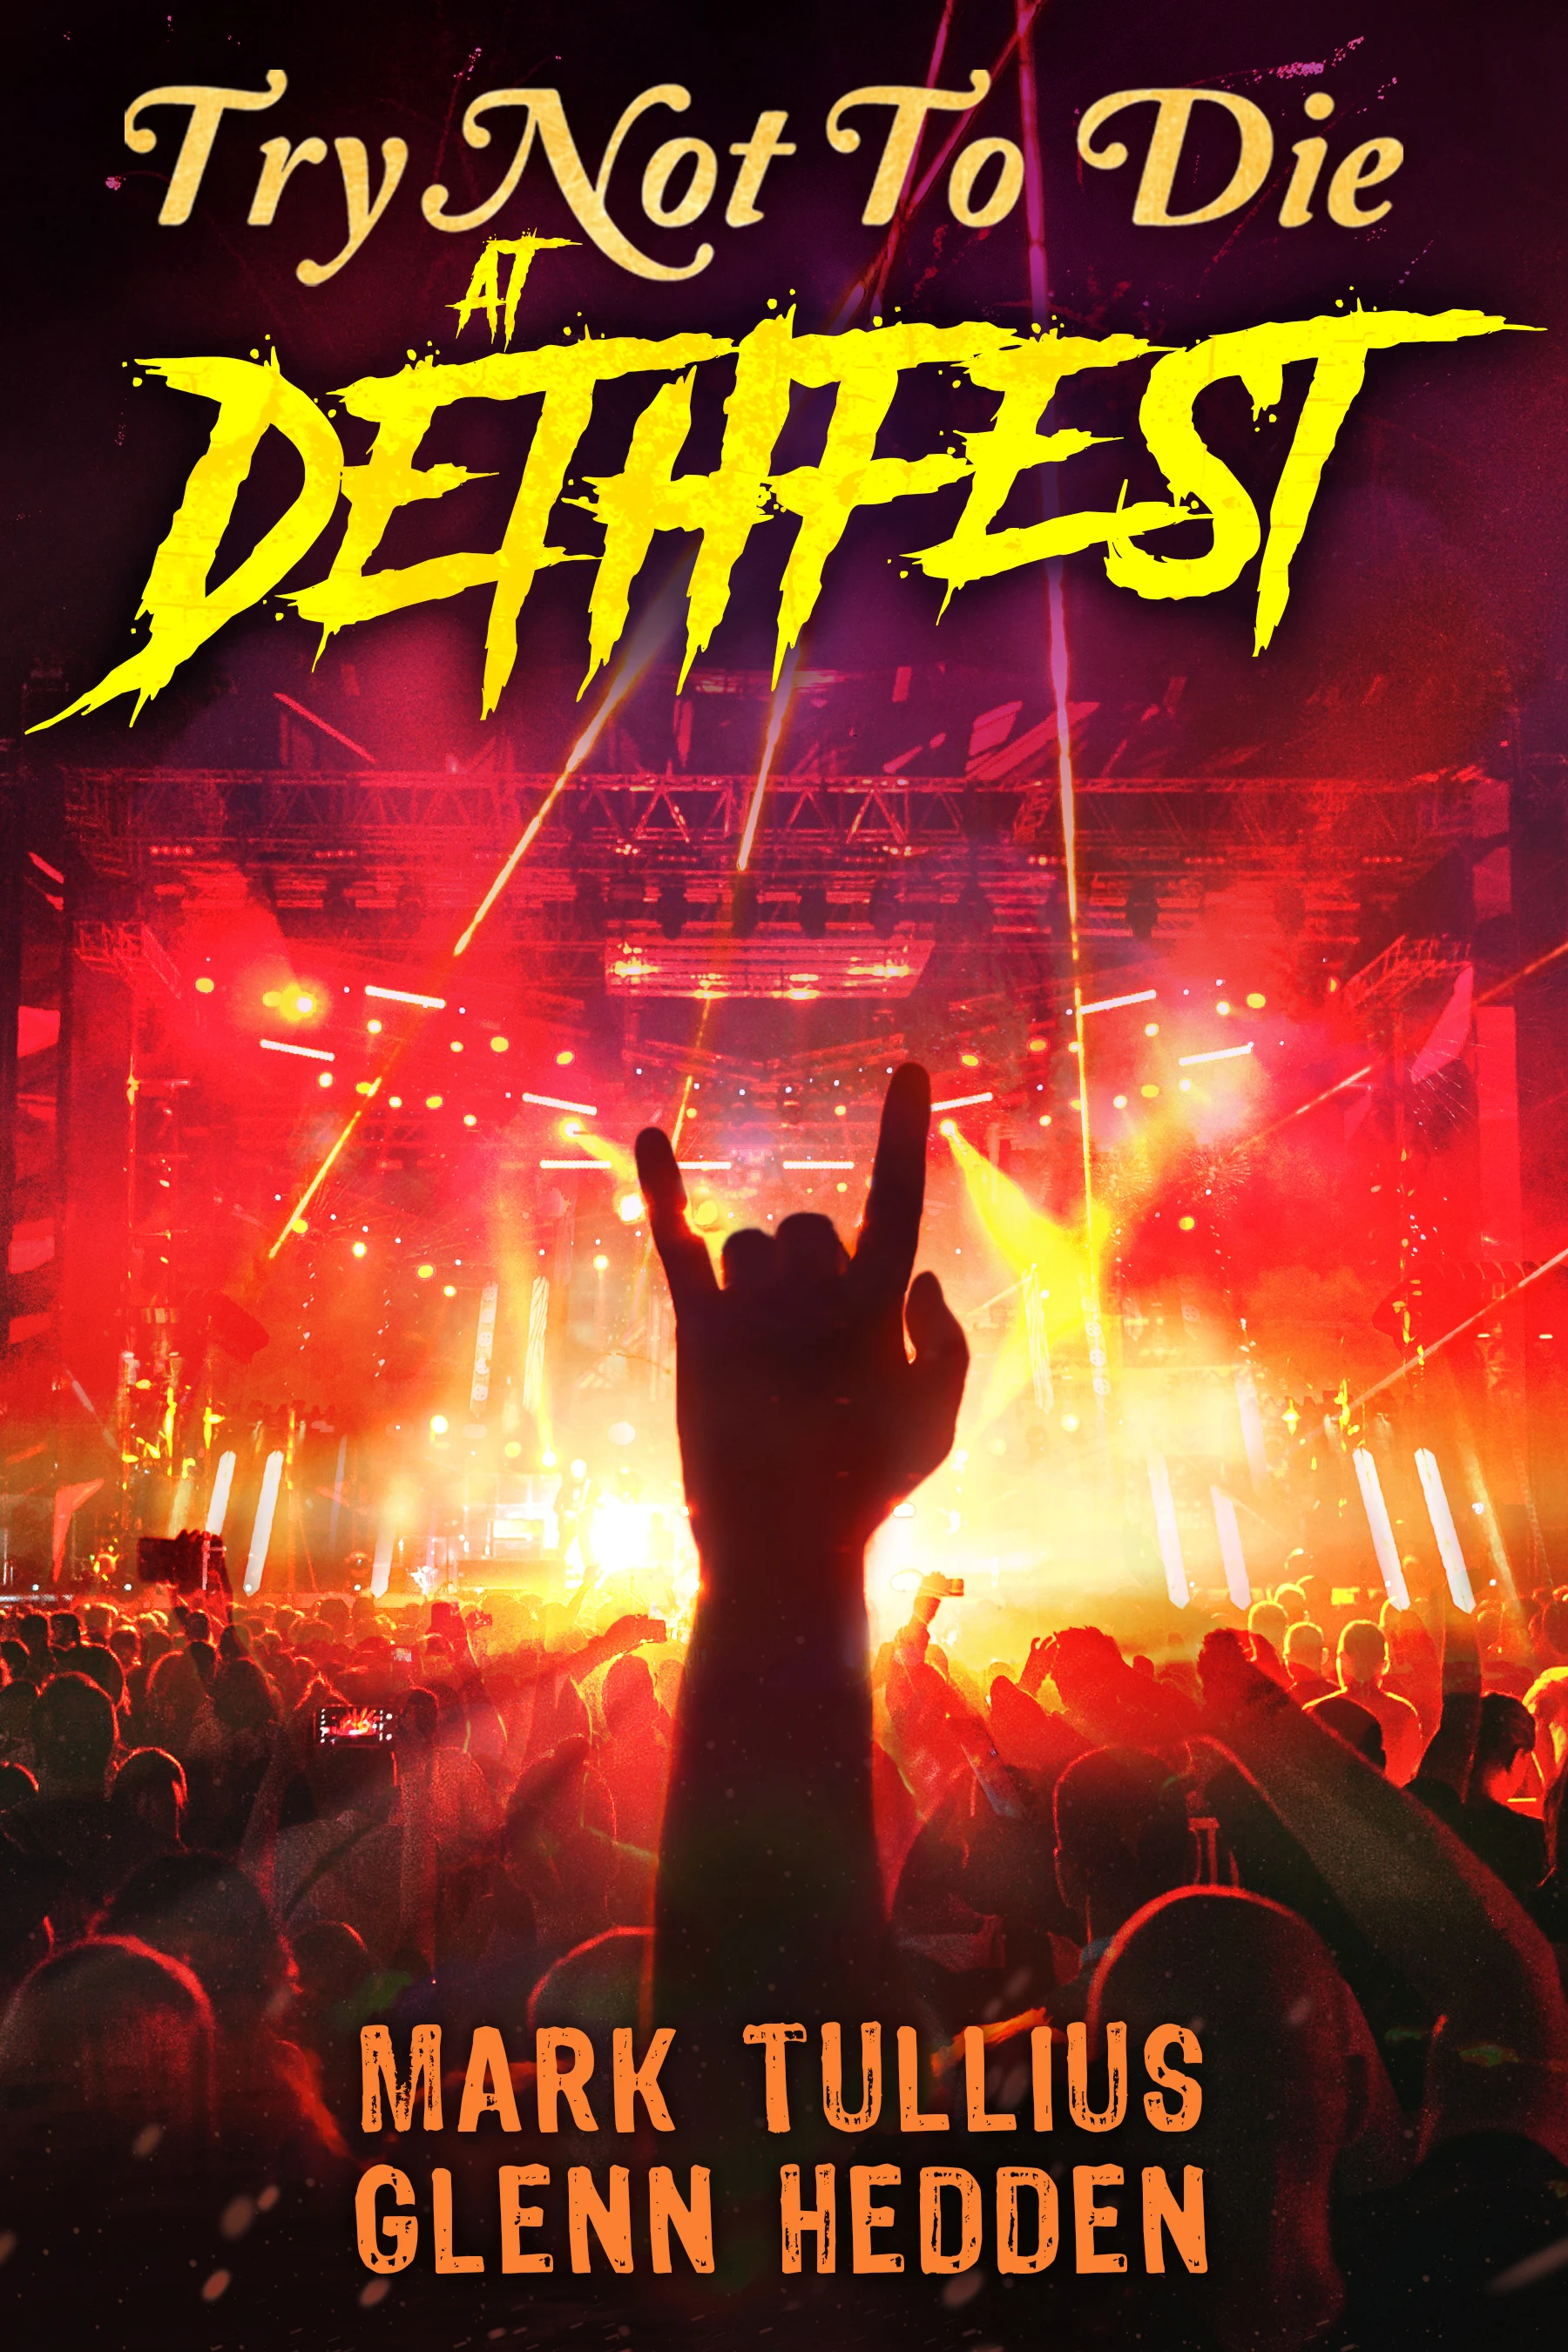 Try Not to Die: At Dethfest